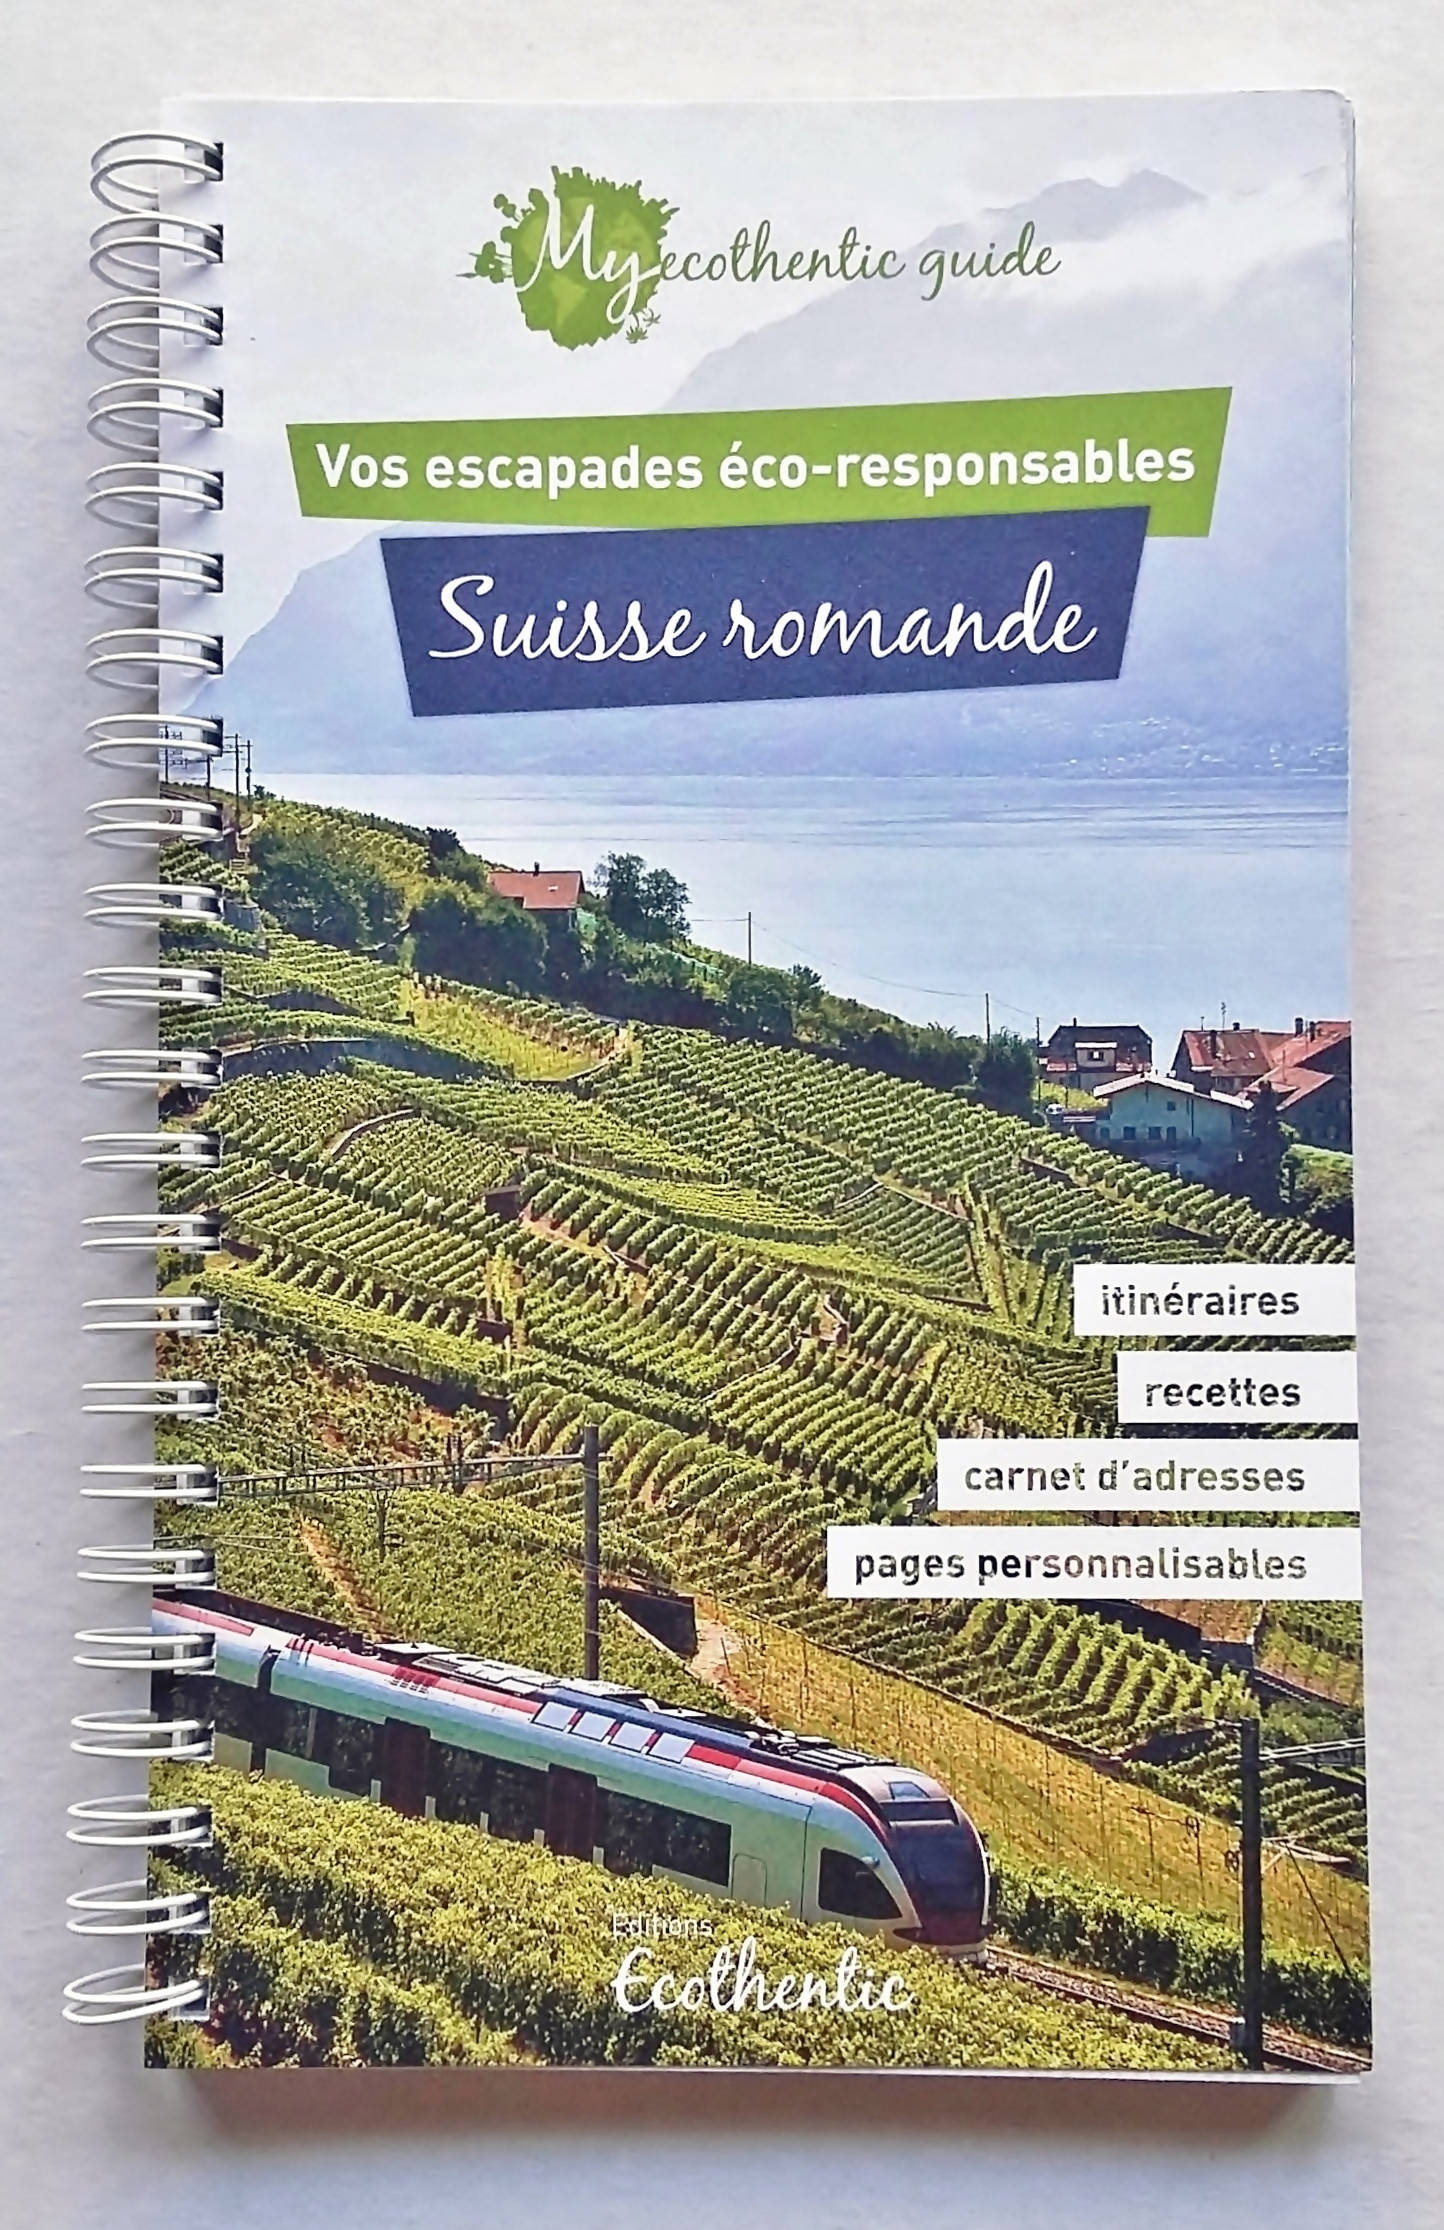 My ecothentic guide Suisse romande